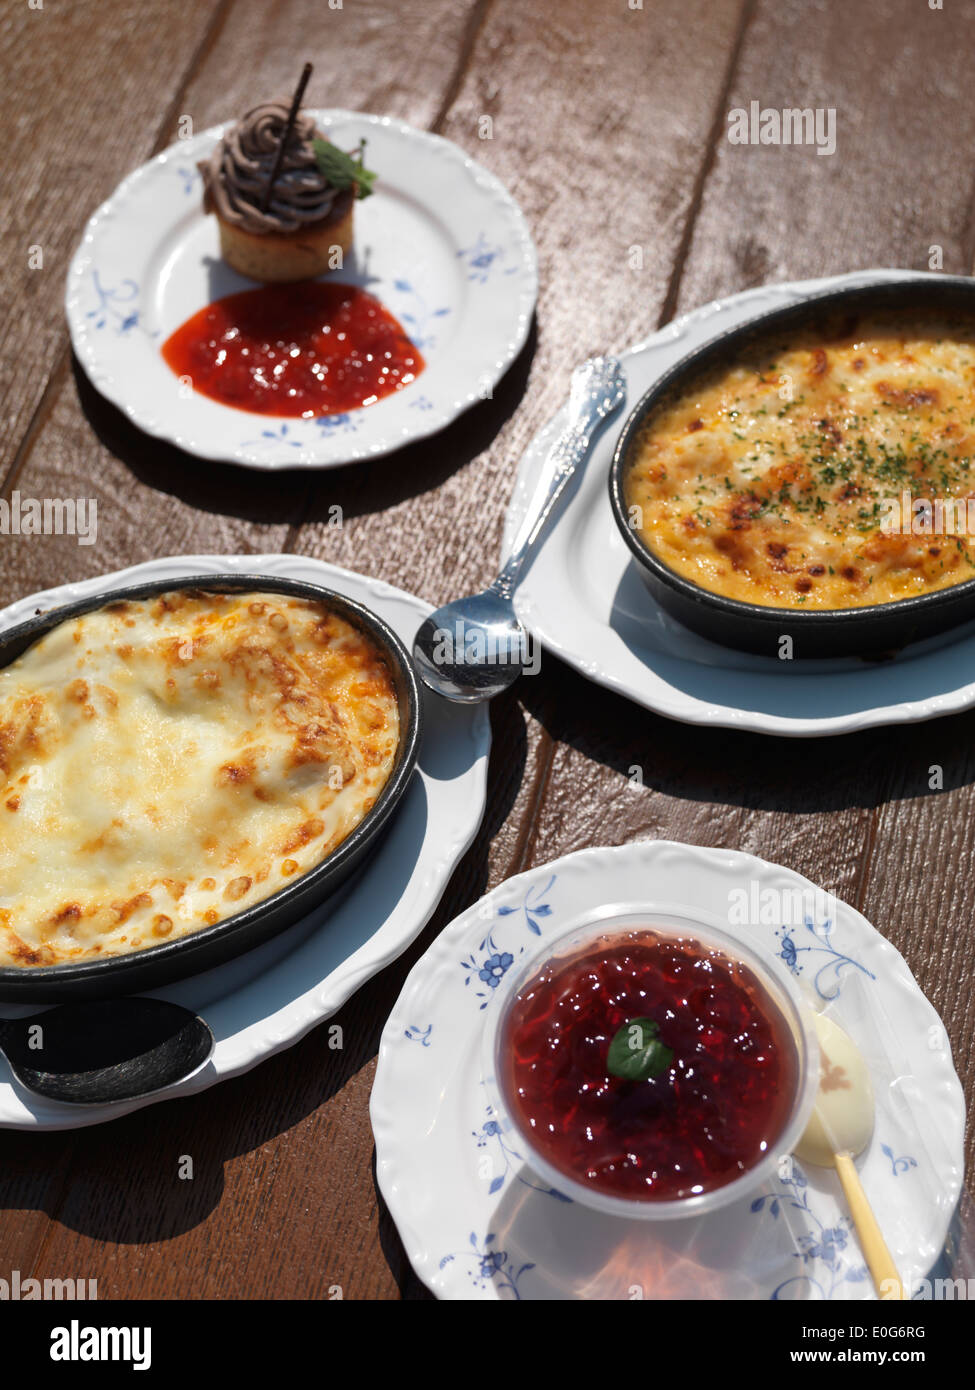 Lasagna, casserole dish and desserts on a table at Italian restaurant Stock Photo